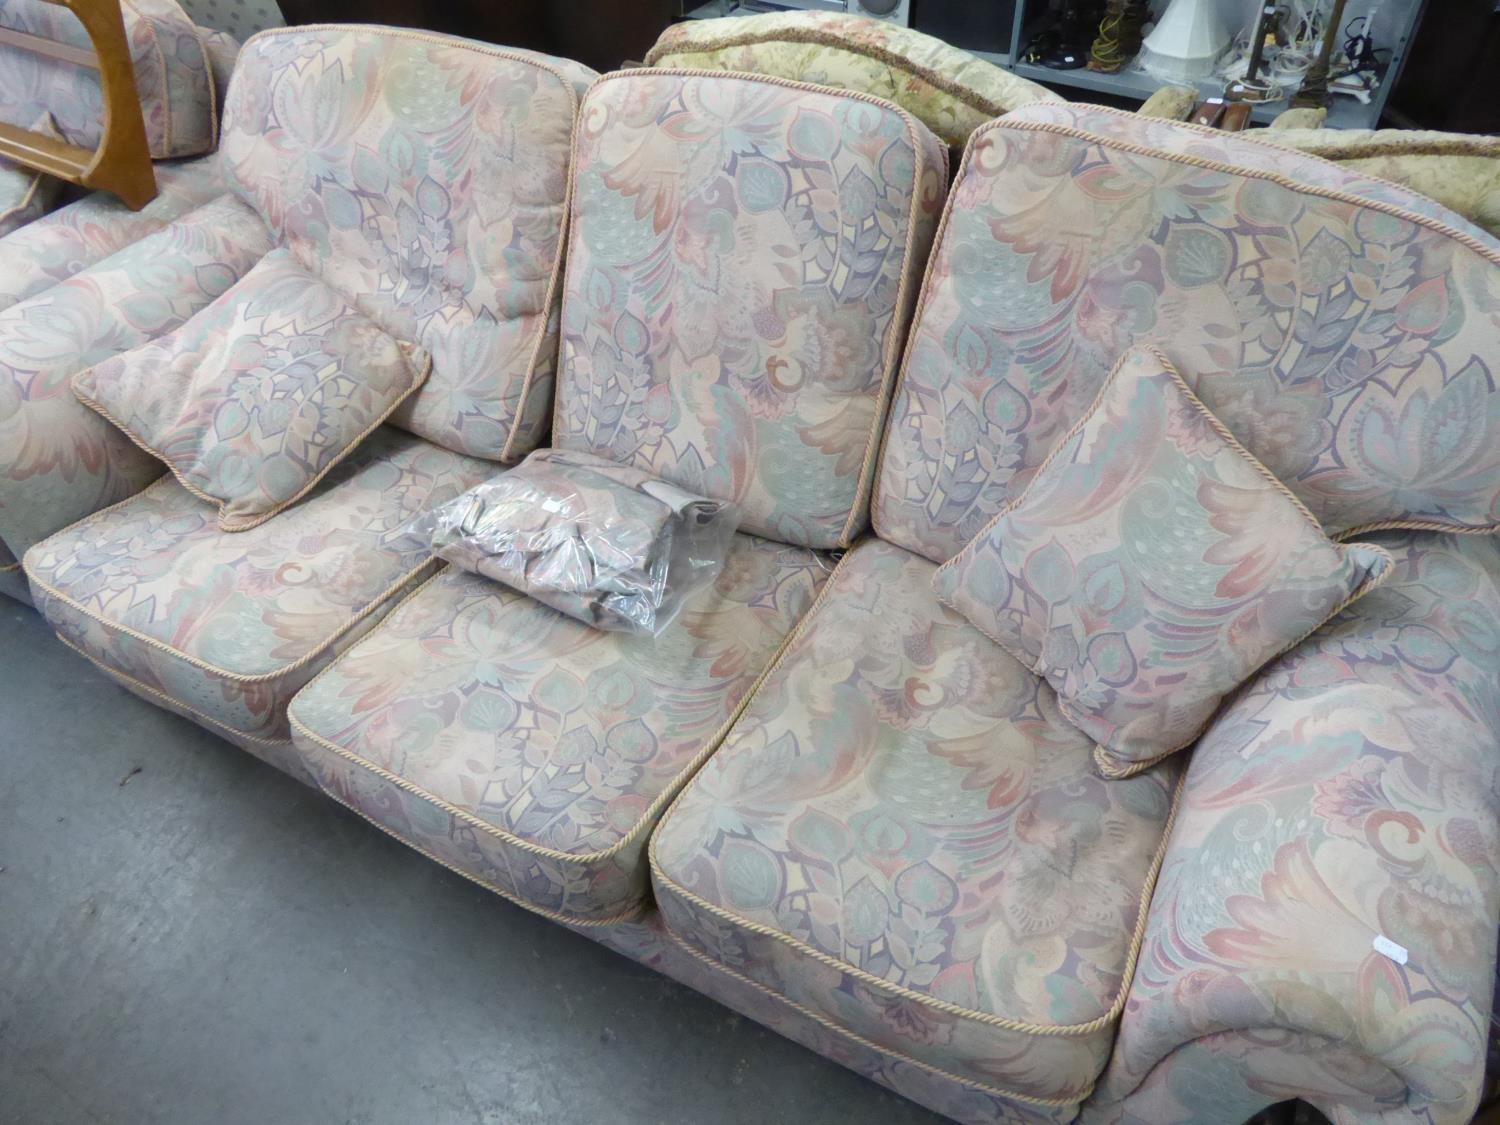 A LOUNGE SUITE OF FOUR PIECES, COVERED IN PASTEL PINK AND BLUE FLORAL FABRIC, VIZ A THREE SEATER